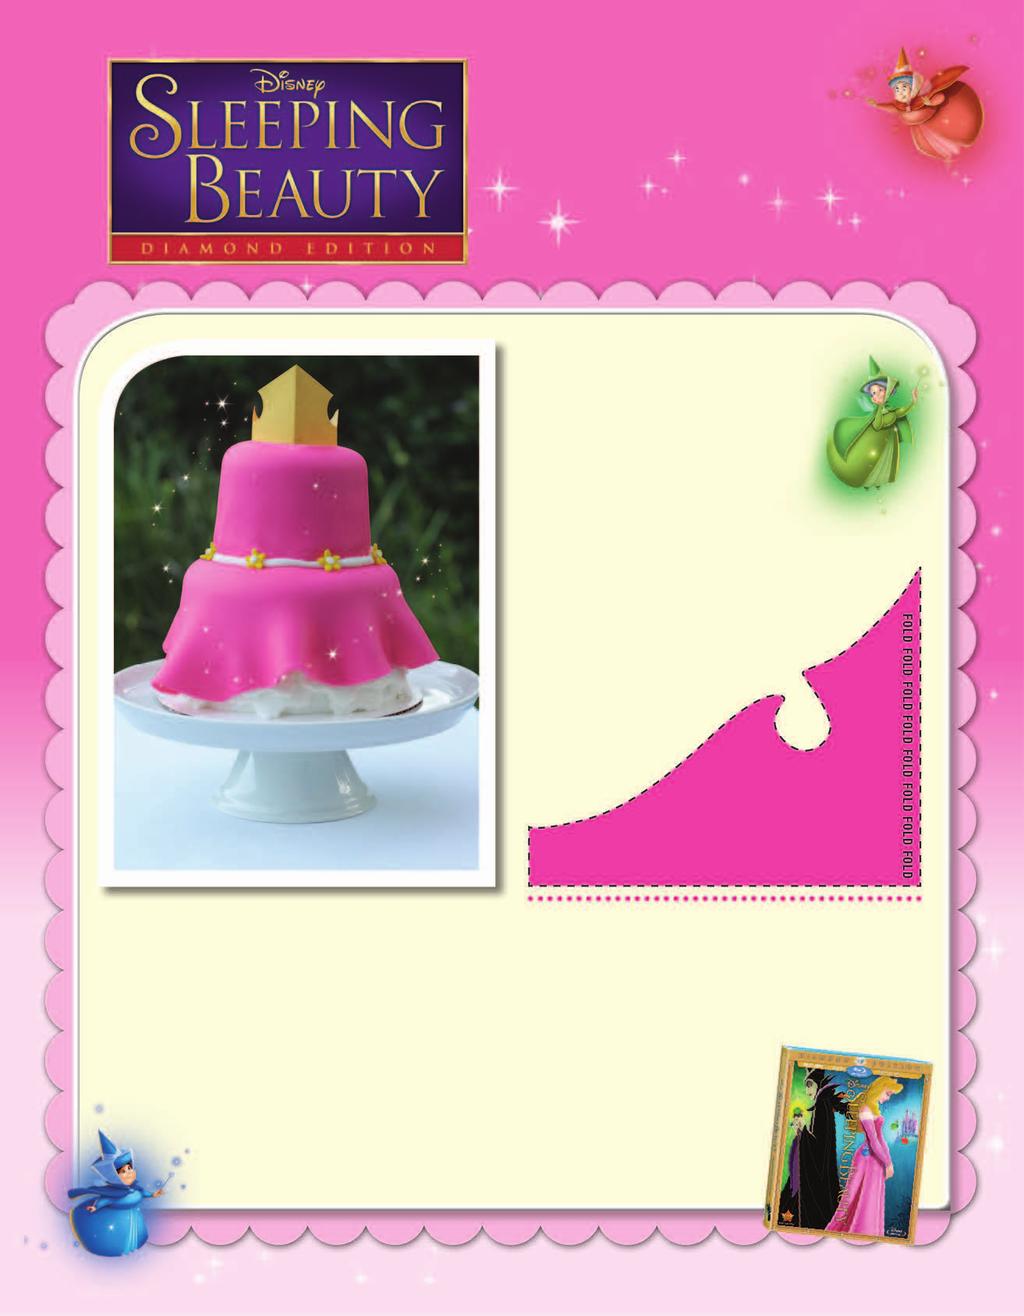 Gluten Free PRINCESS CAKE Celebrate your next birthday like a true princess by offering your royal guests a cake that everyone